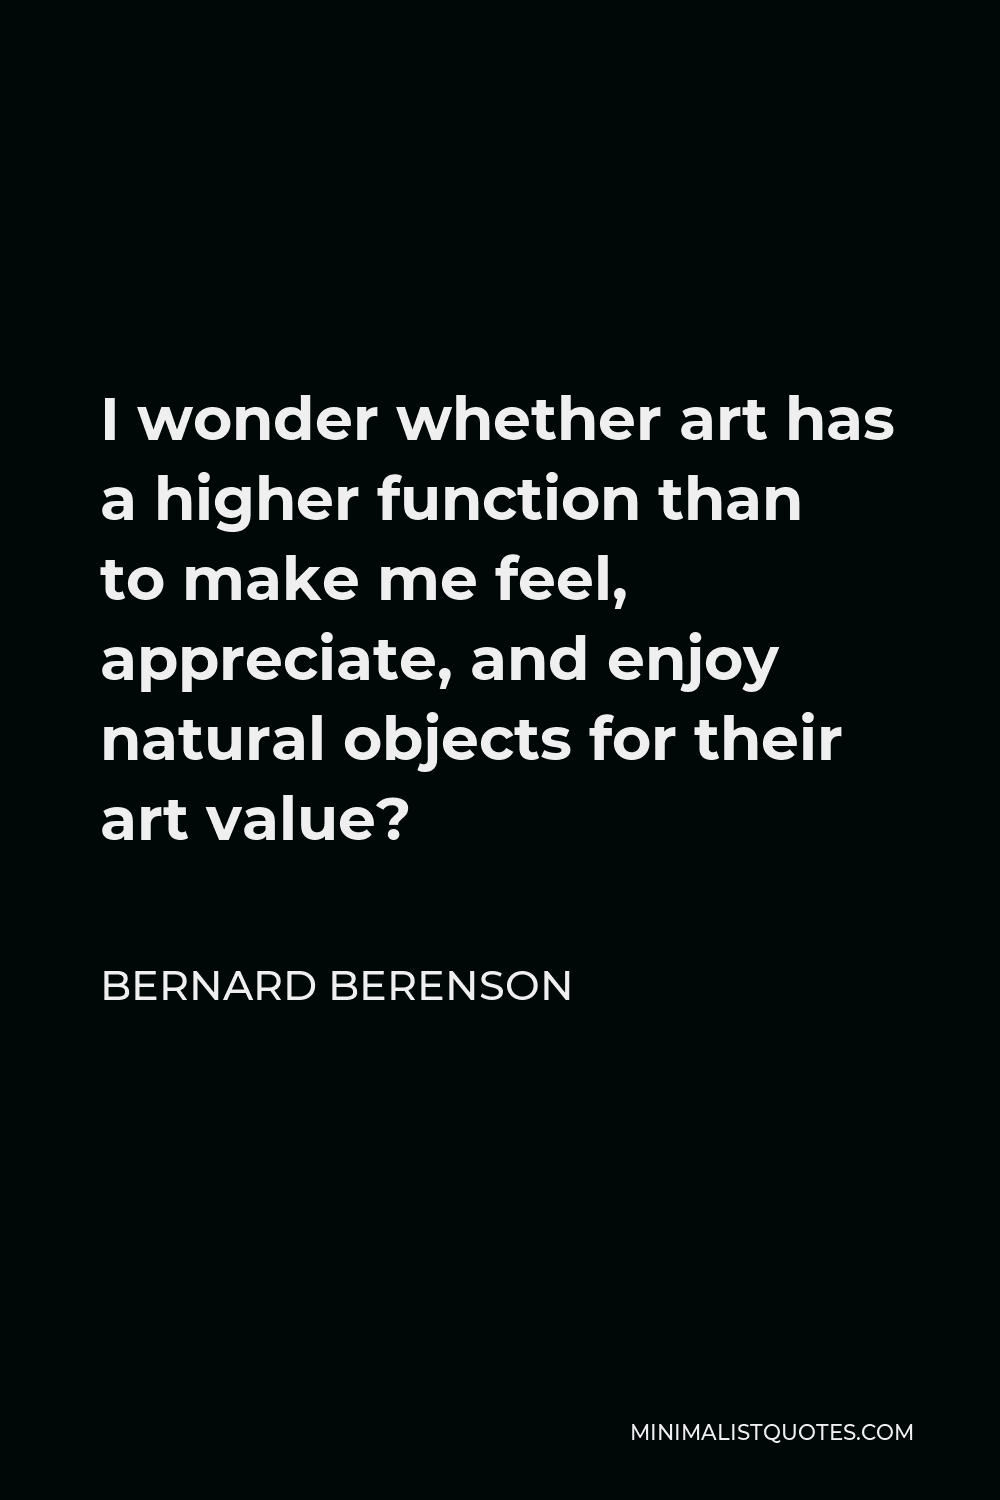 Bernard Berenson Quote - I wonder whether art has a higher function than to make me feel, appreciate, and enjoy natural objects for their art value?